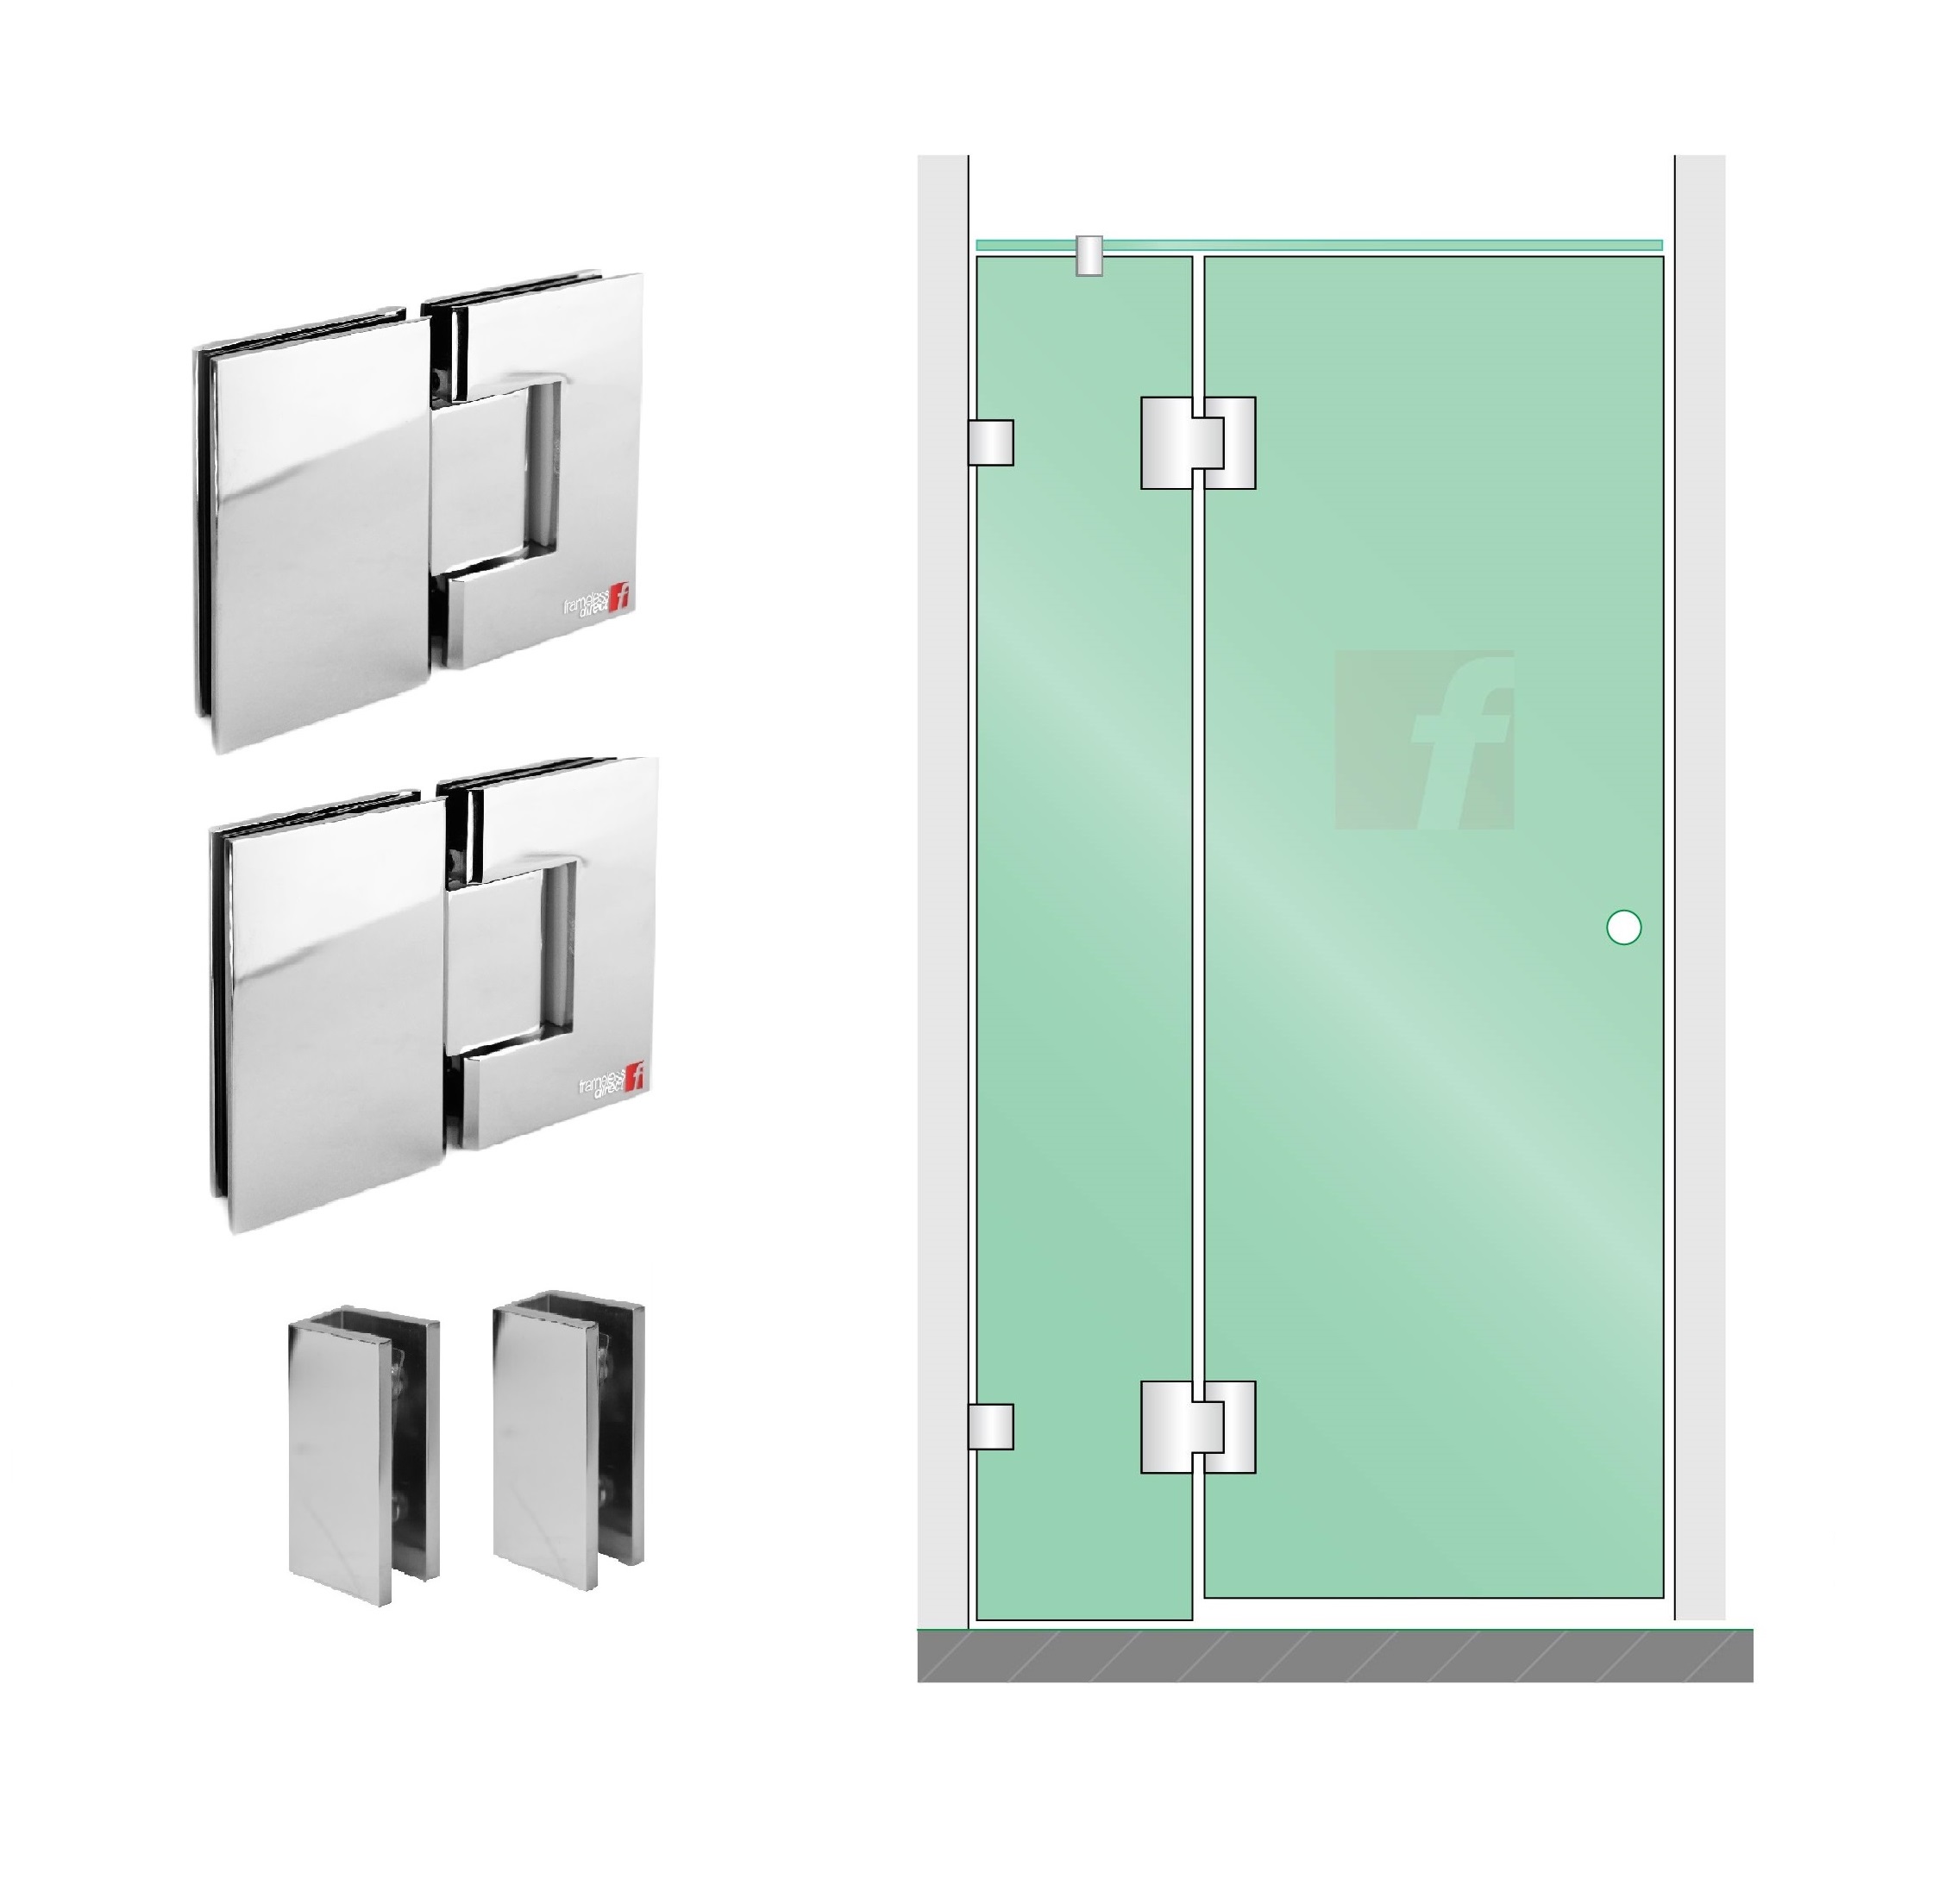 2 PANEL A (IN-LINE) WITH CHROME PLATED HARDWARE